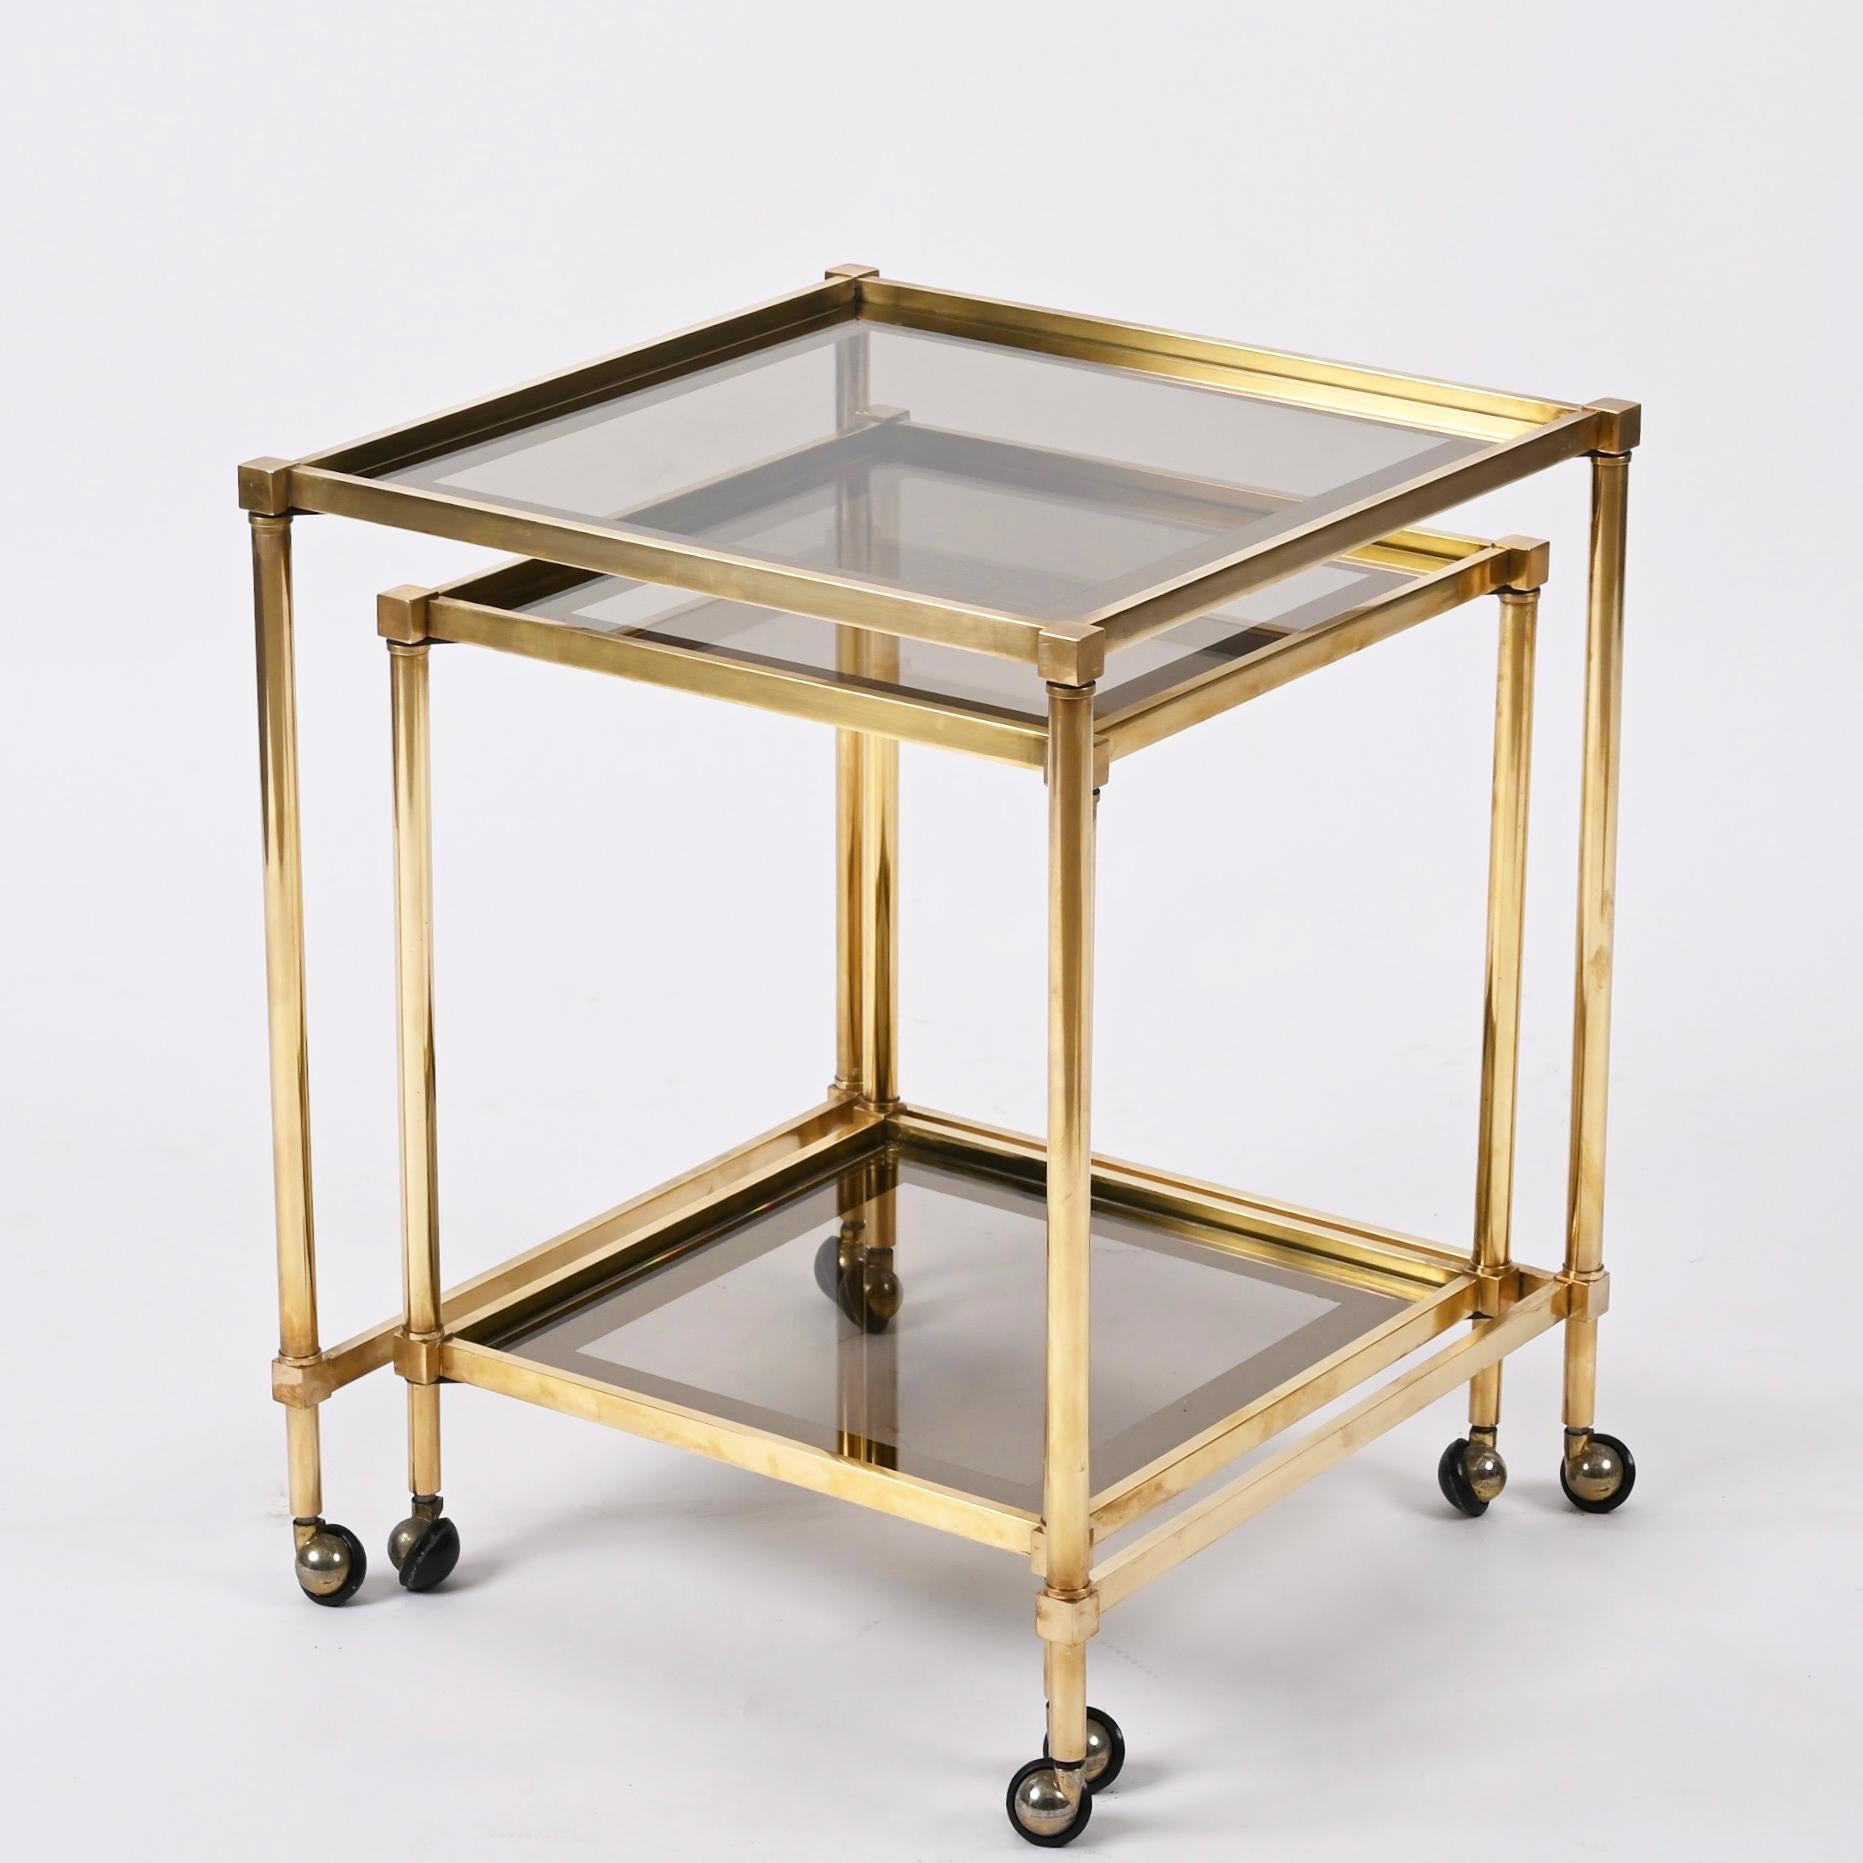 Pair of Maison Jansen Brass Mirrored Border Nesting Tables with Glass Top, 1970s For Sale 8